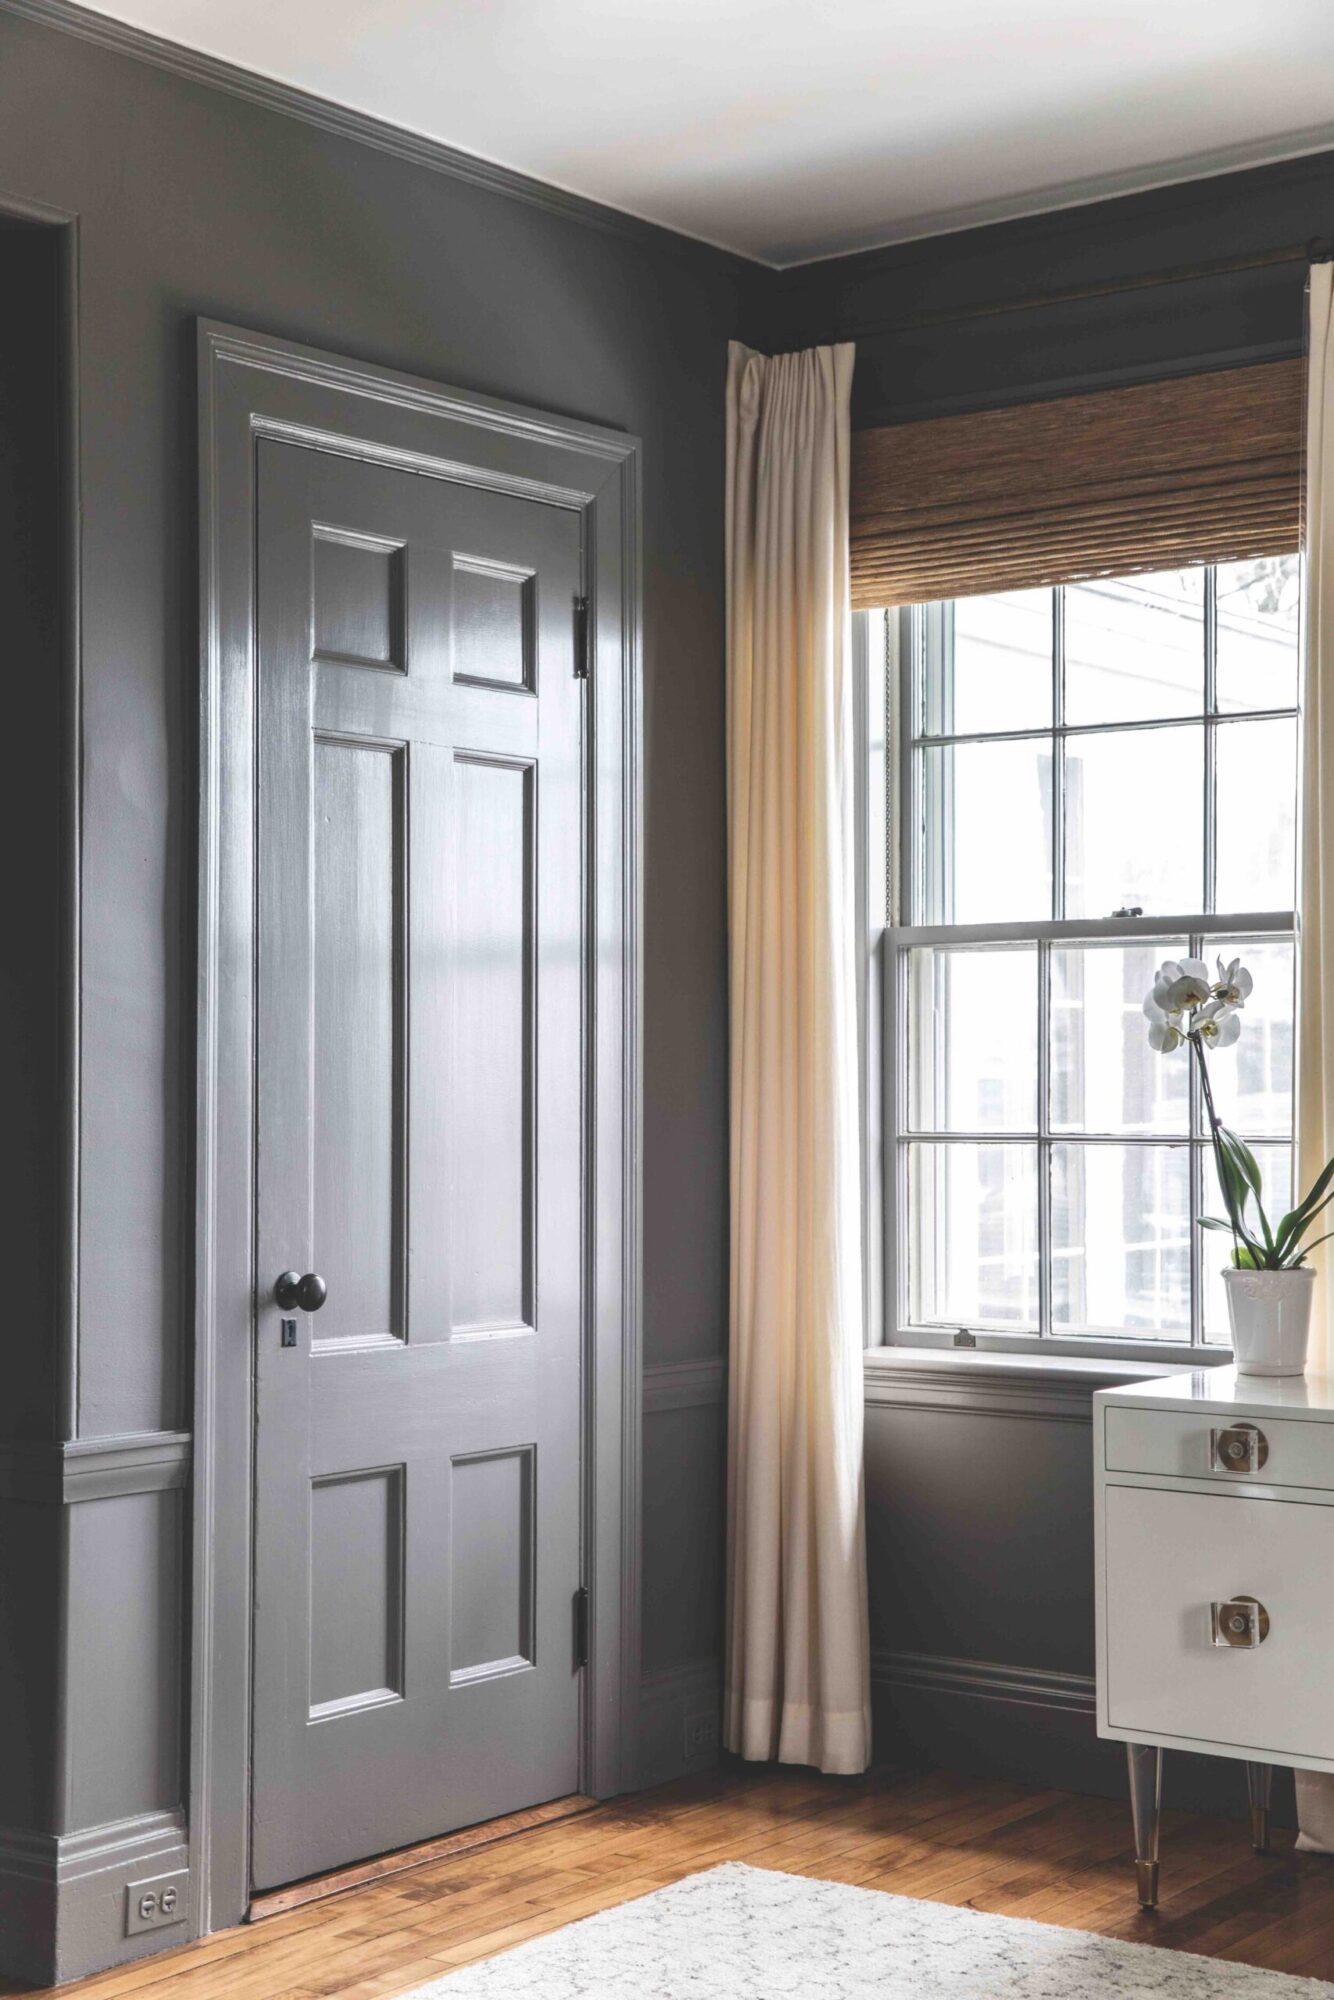 A charcoal wash for the walls, trim, and door makes a bold statement paired with earthy window treatments. Photo by Erin Little.